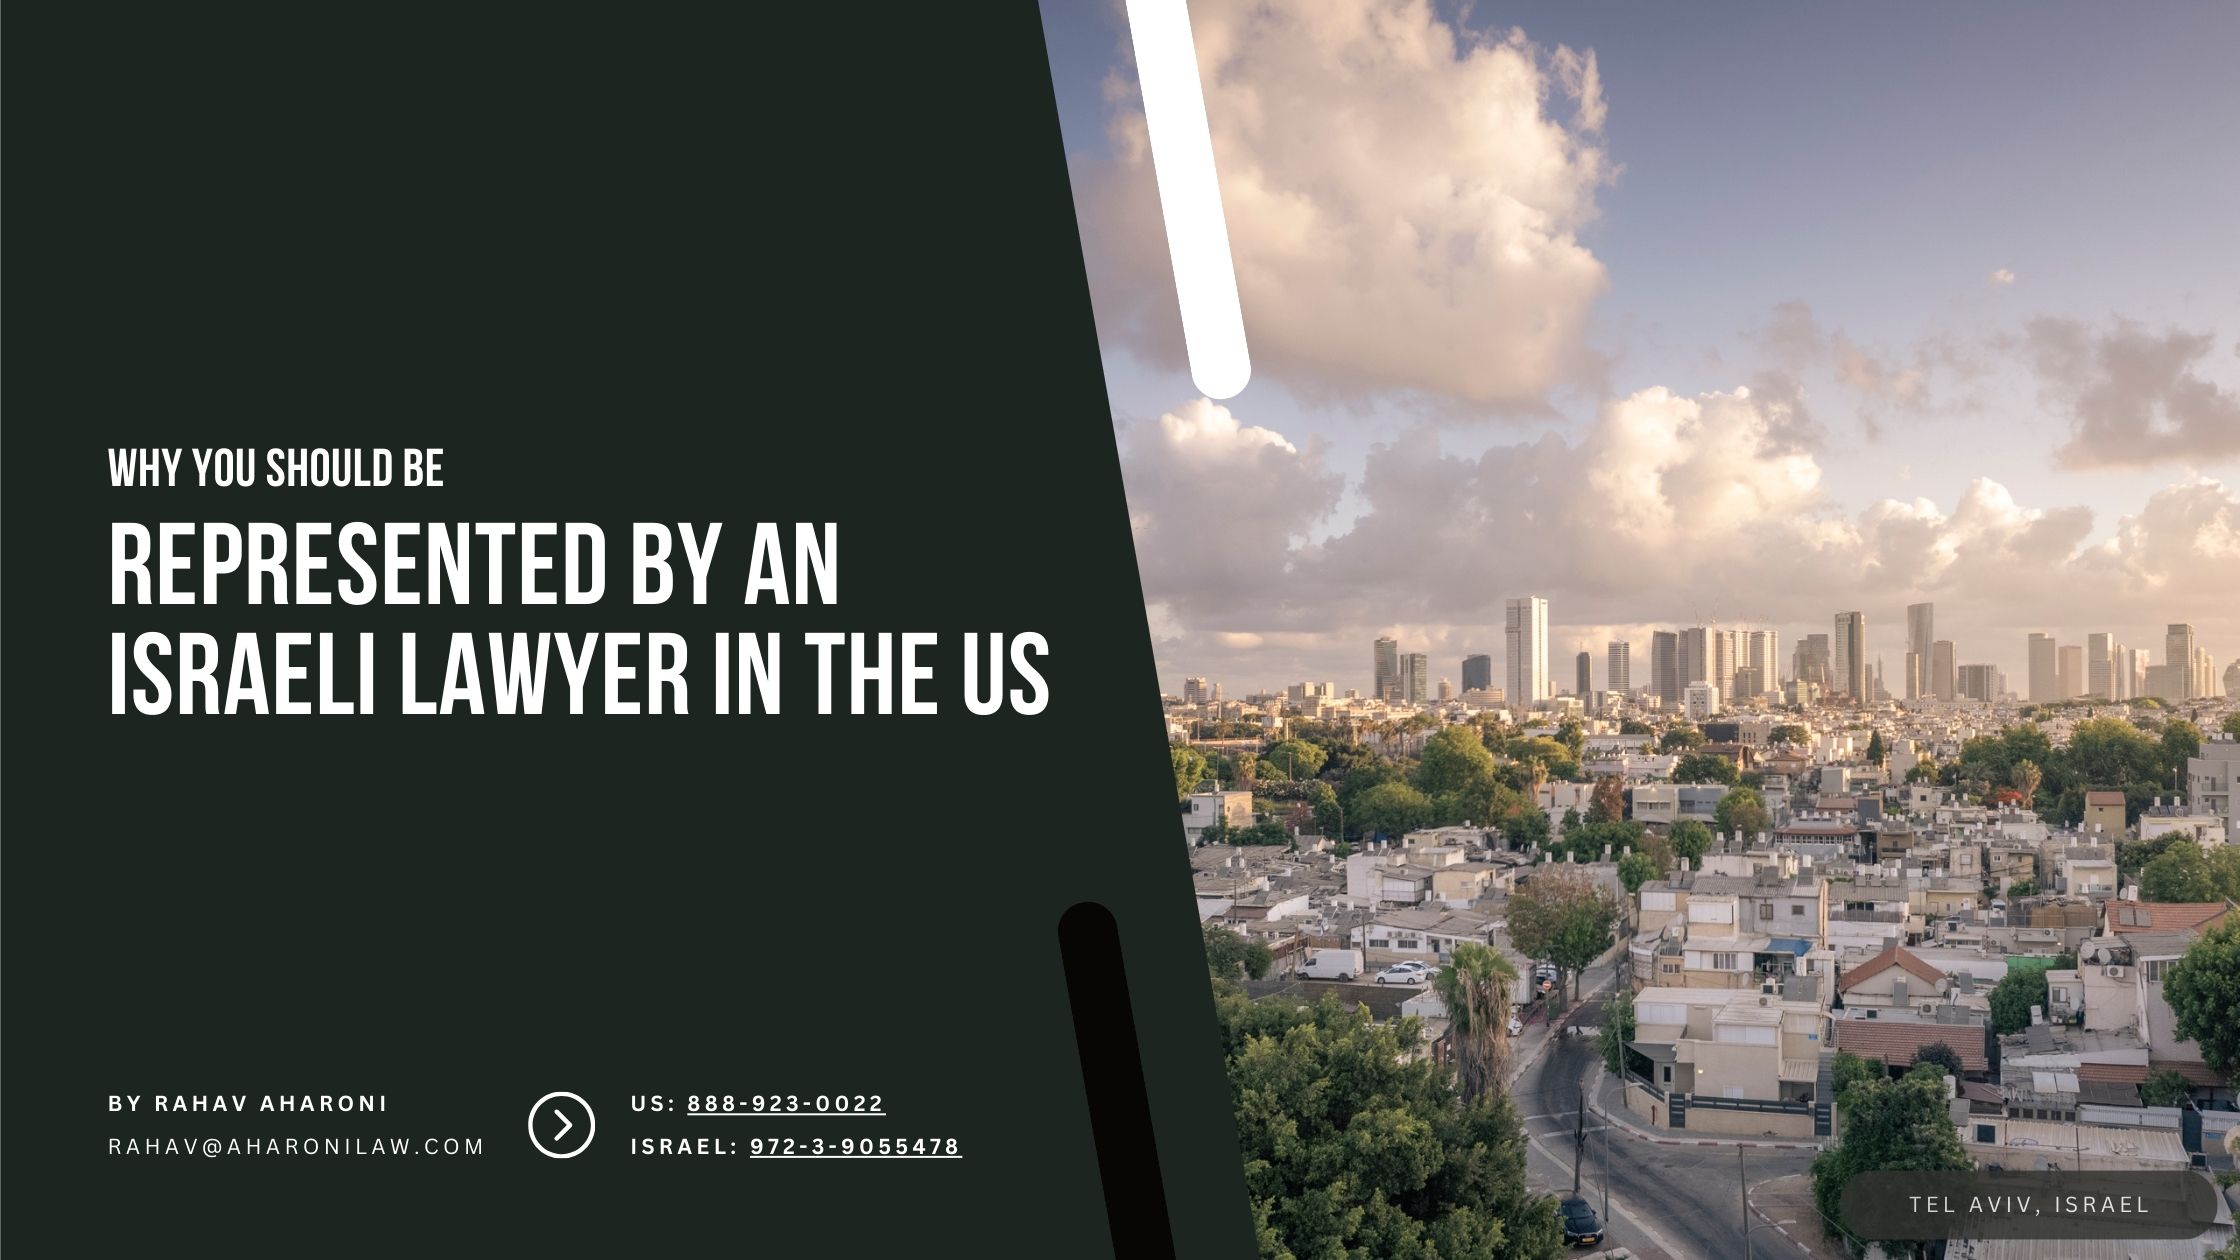 Why You Should Be Represented by an Israeli Lawyer in the United States